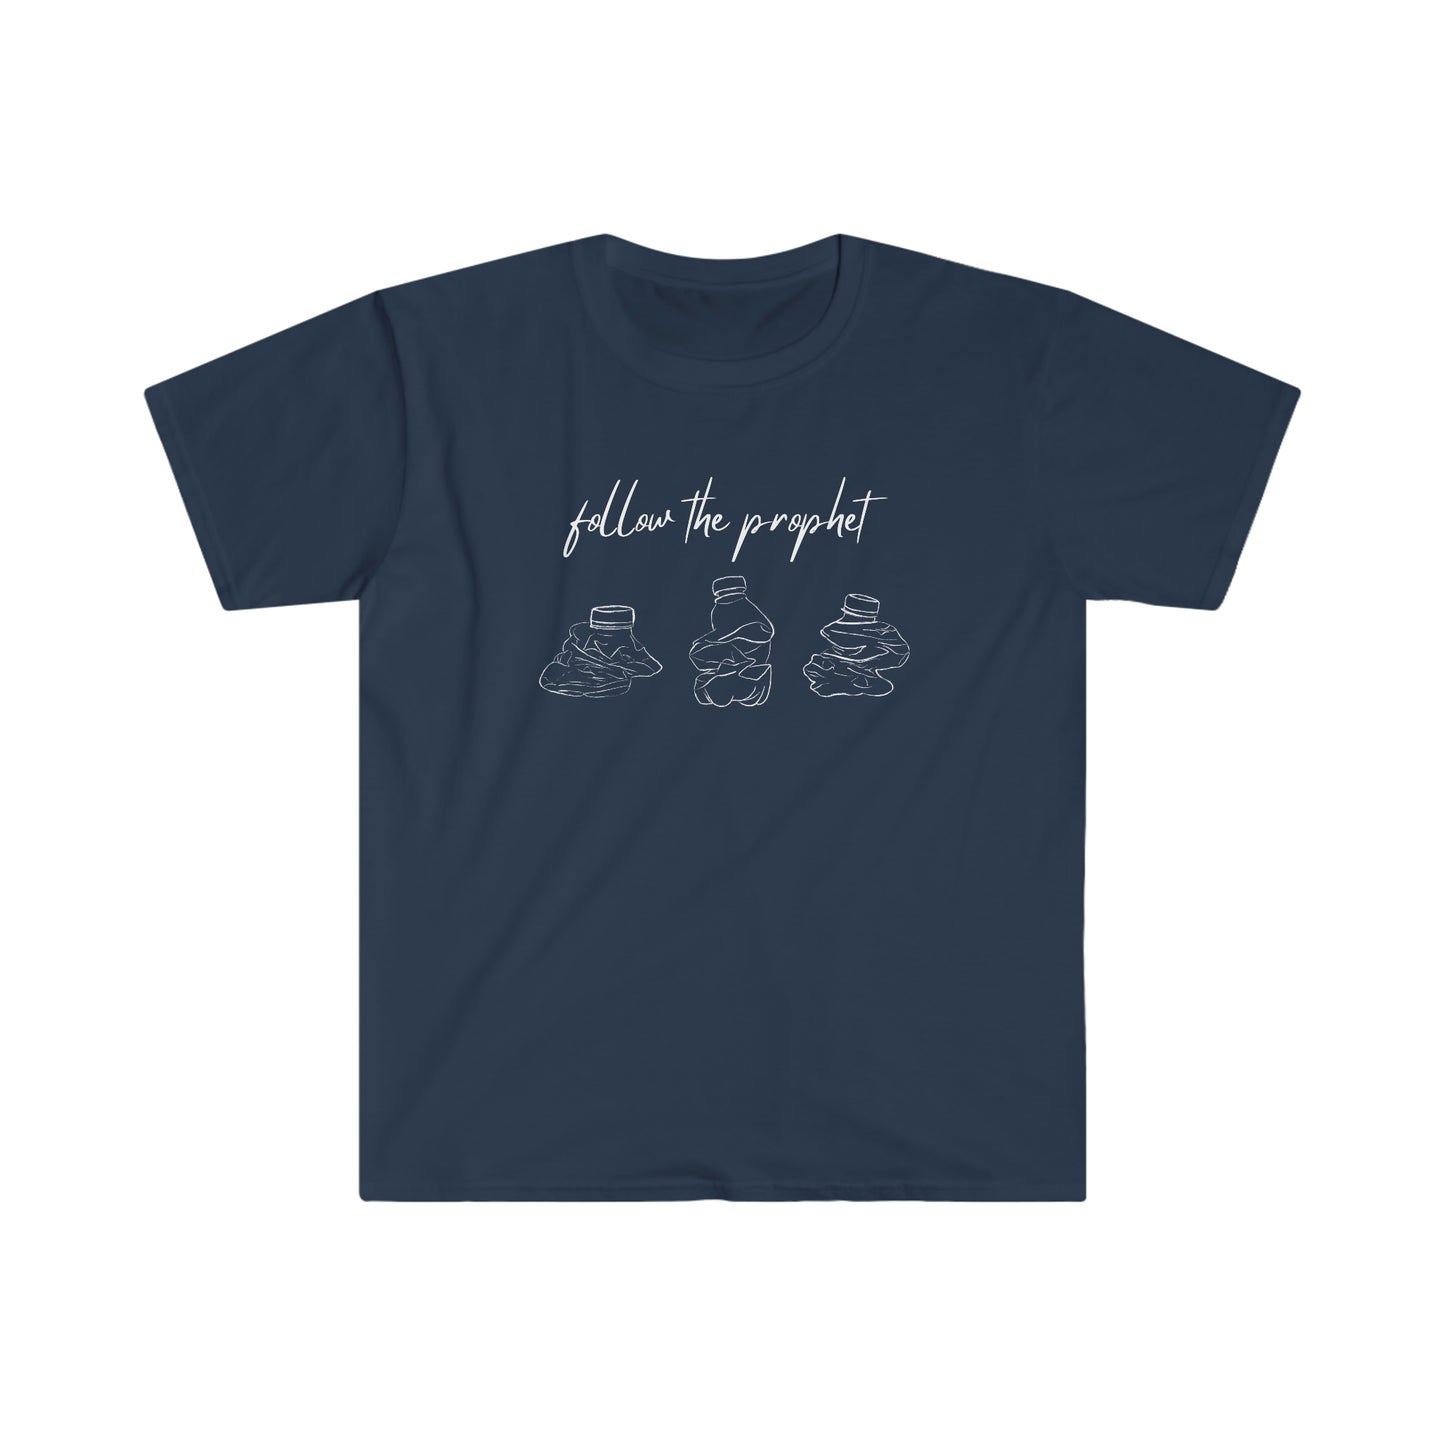 Unisex Softstyle T-Shirt, Follow the Prophet, 2023 General Conference